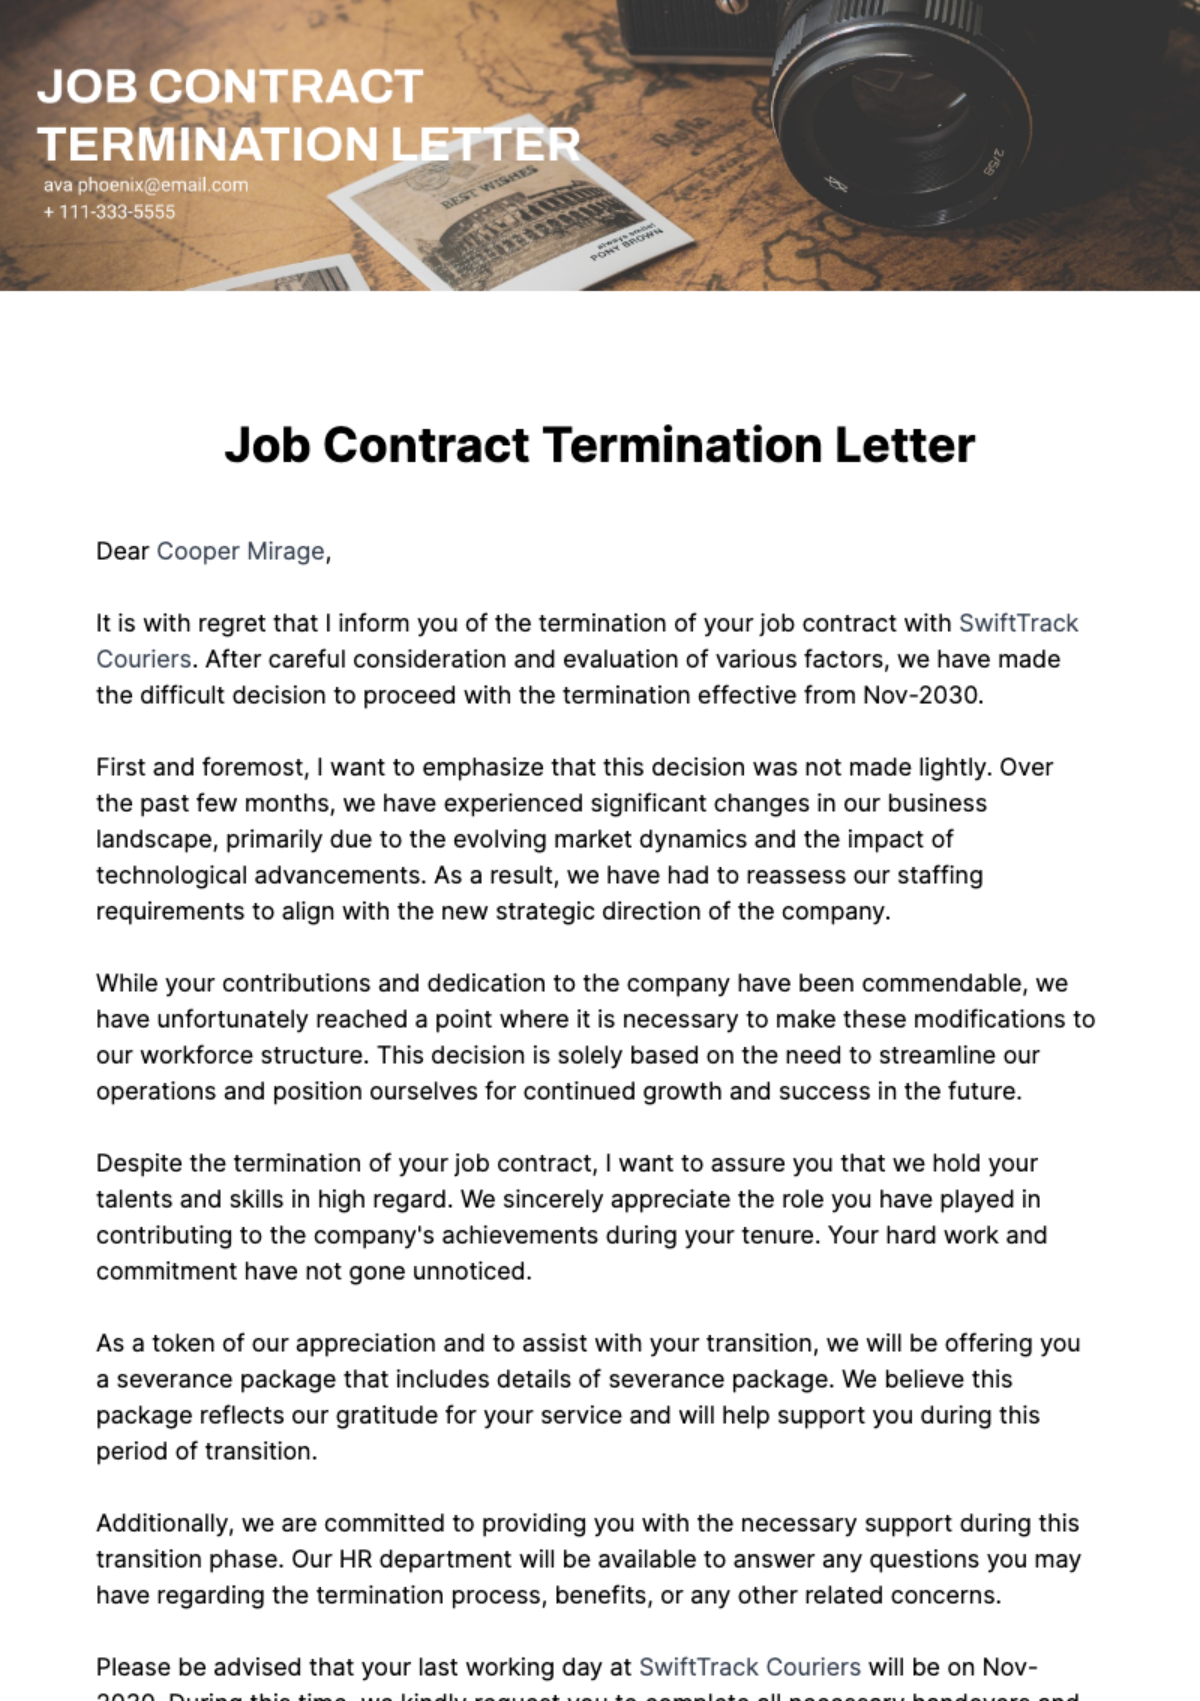 Free Job Contract Termination Letter Template